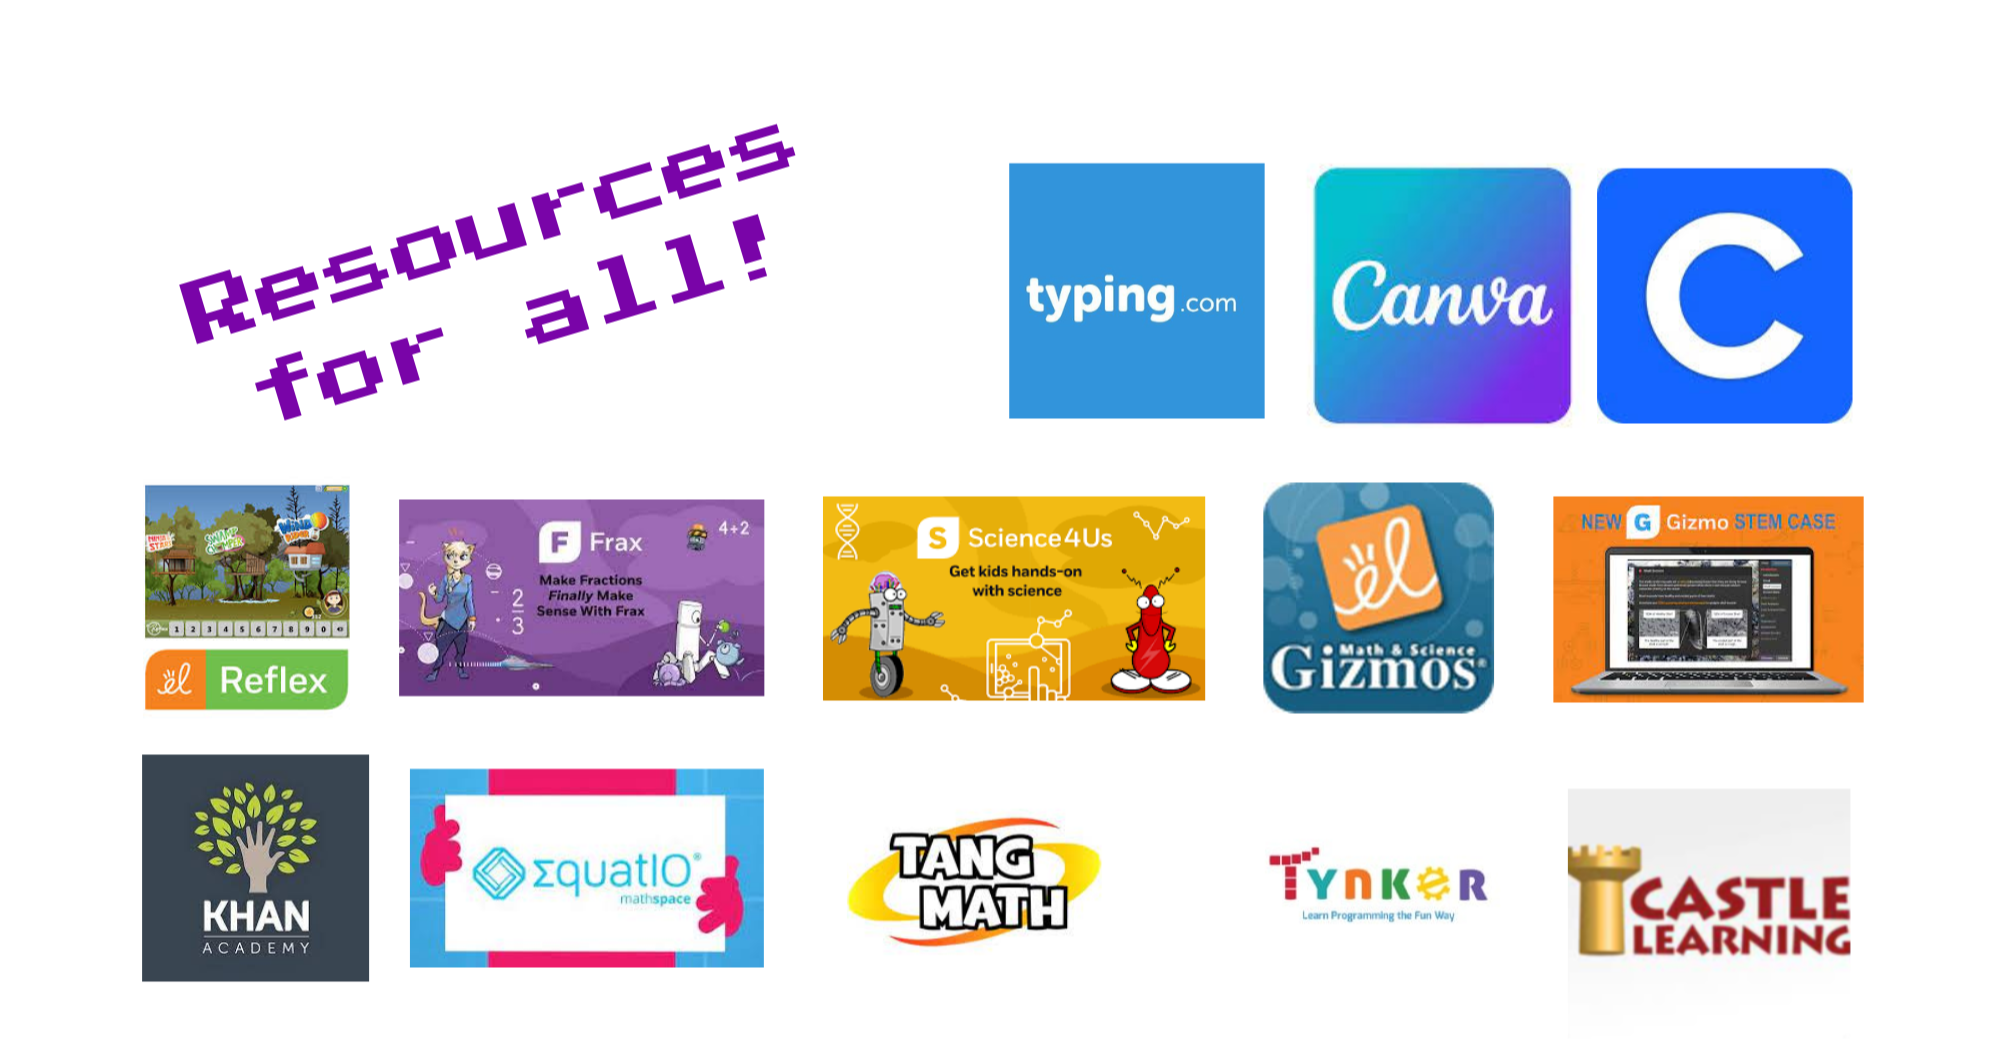 Resources students can use